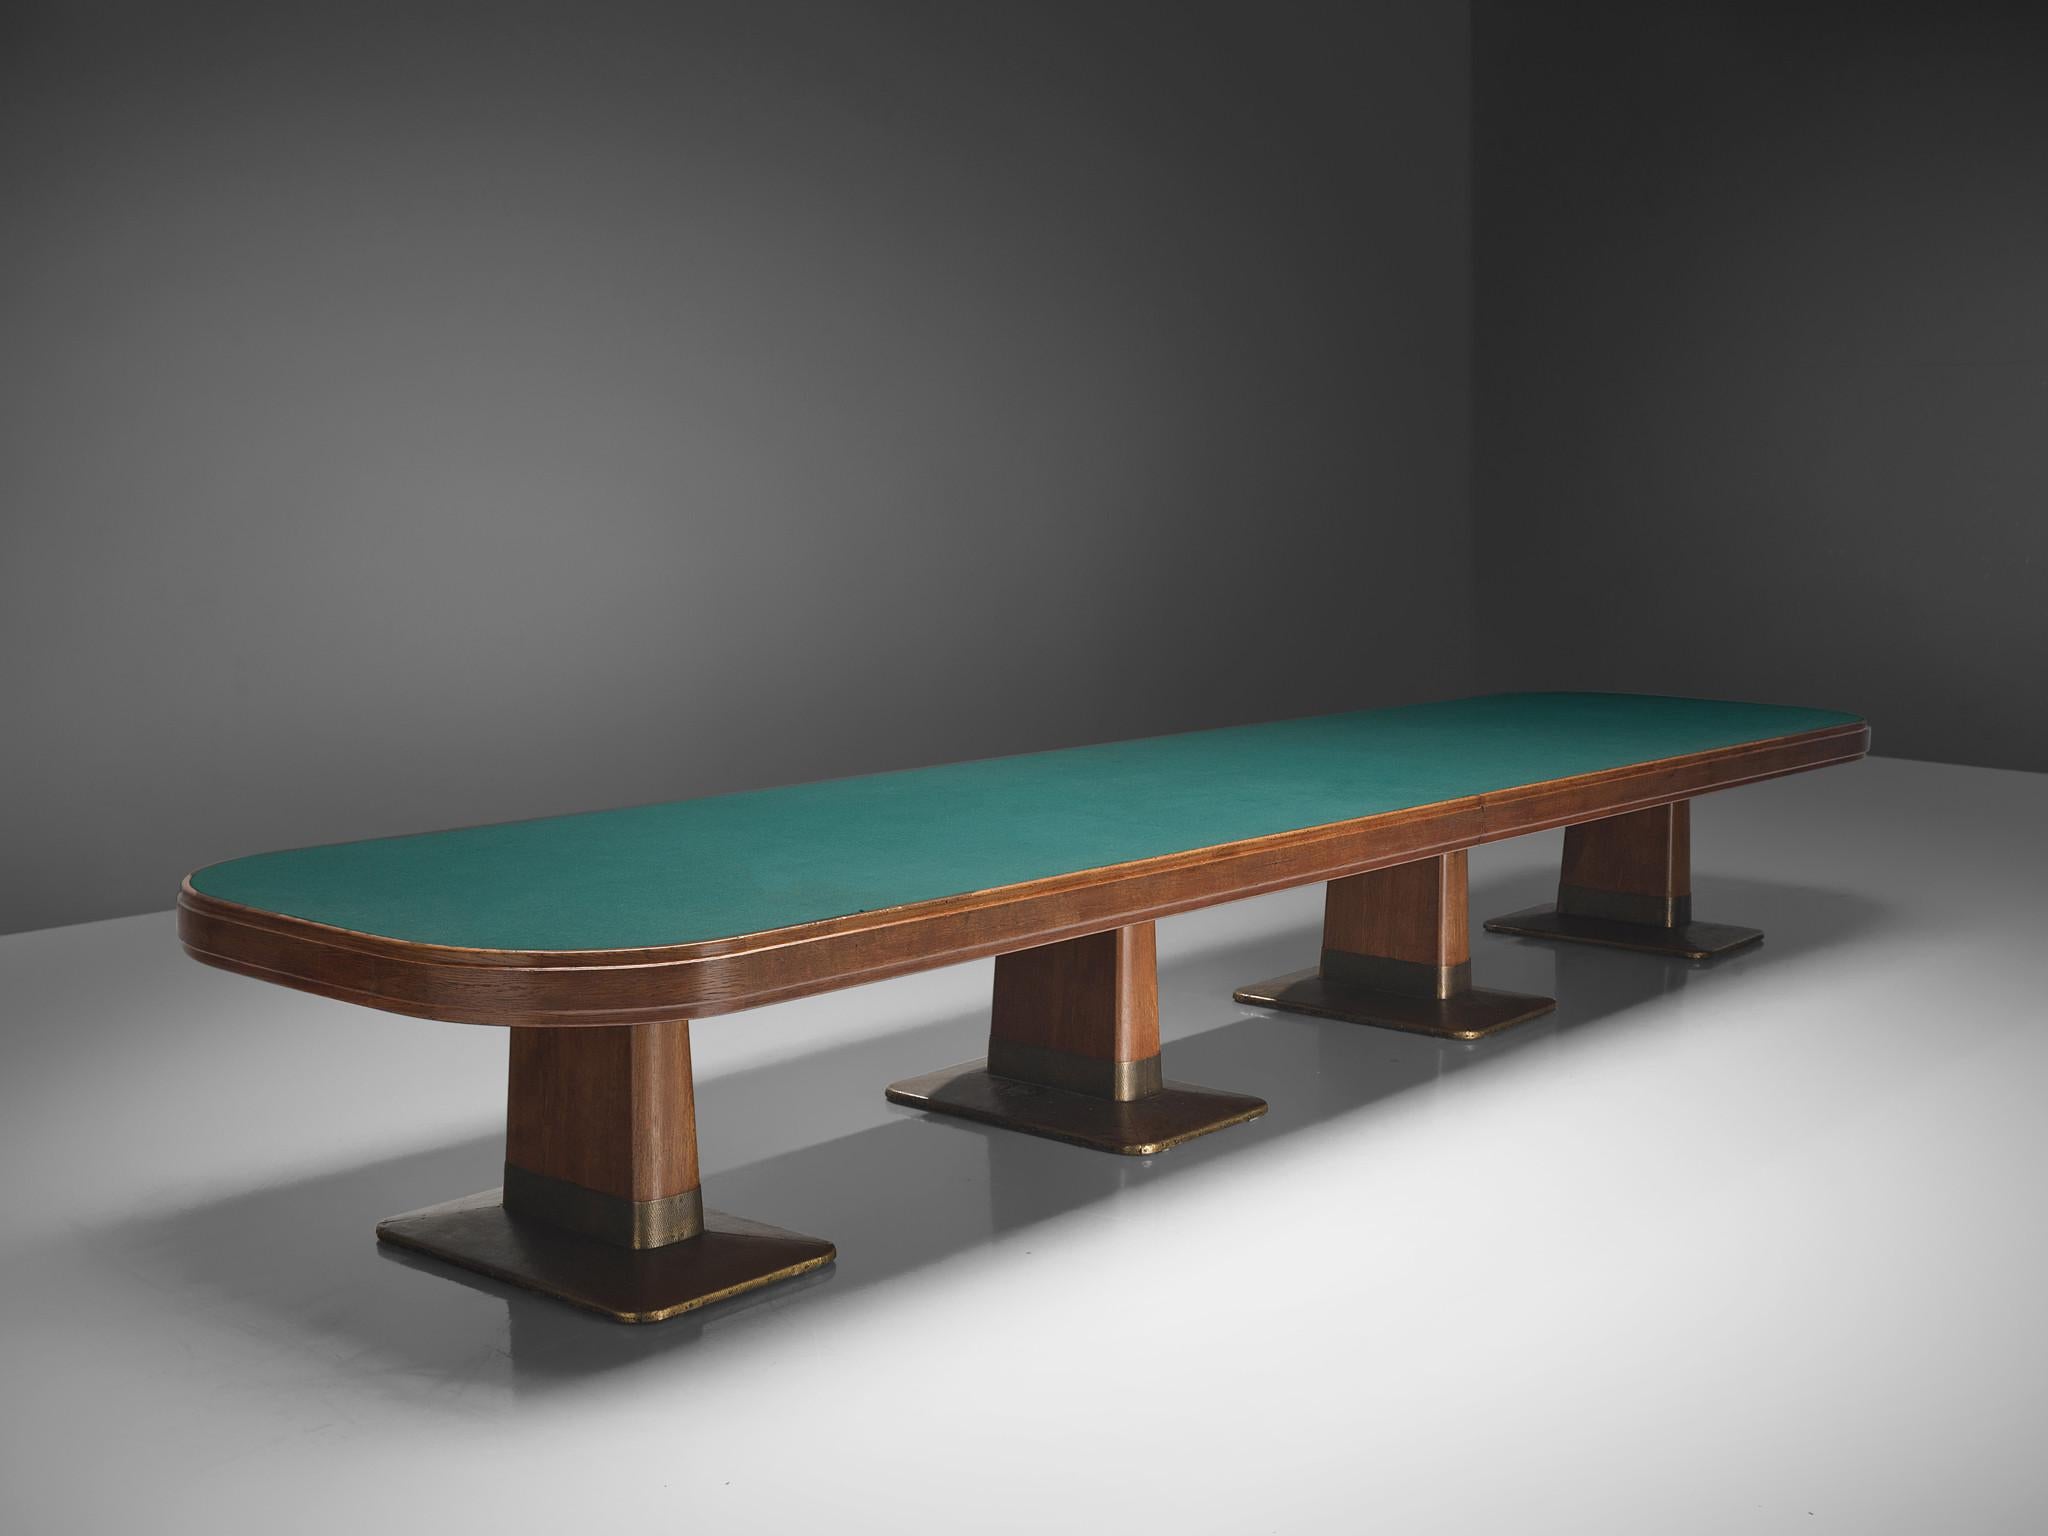 Conference table, oak, brass, felt, plexiglass Germany, 1950s.

A grandiose conference table consisting of two parts that due its width of 19ft could easily function as a conference table. The rectangular-shaped tabletop with curved edges is covered